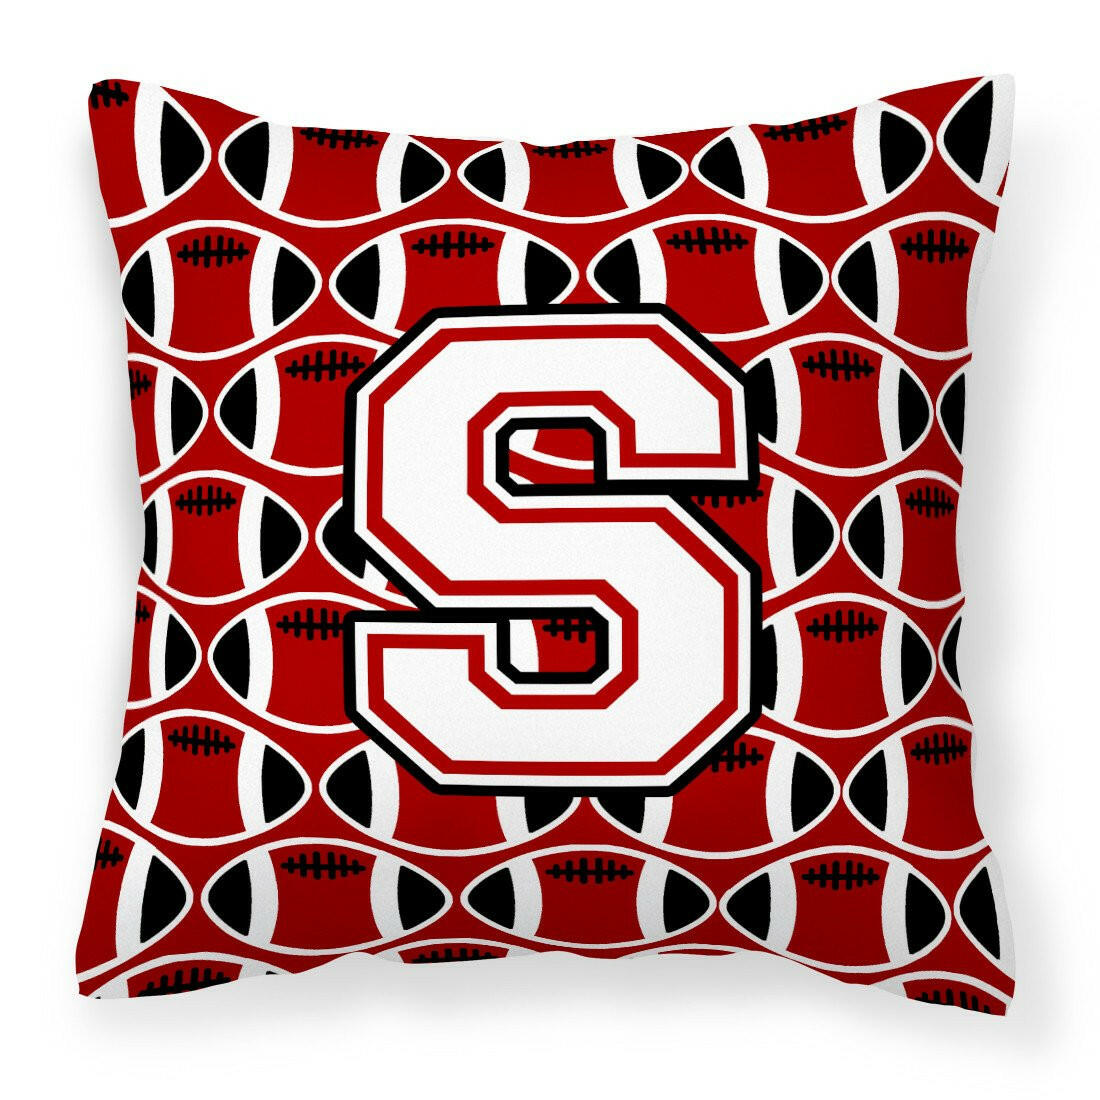 Letter S Football Cardinal and White Fabric Decorative Pillow CJ1082-SPW1414 by Caroline's Treasures